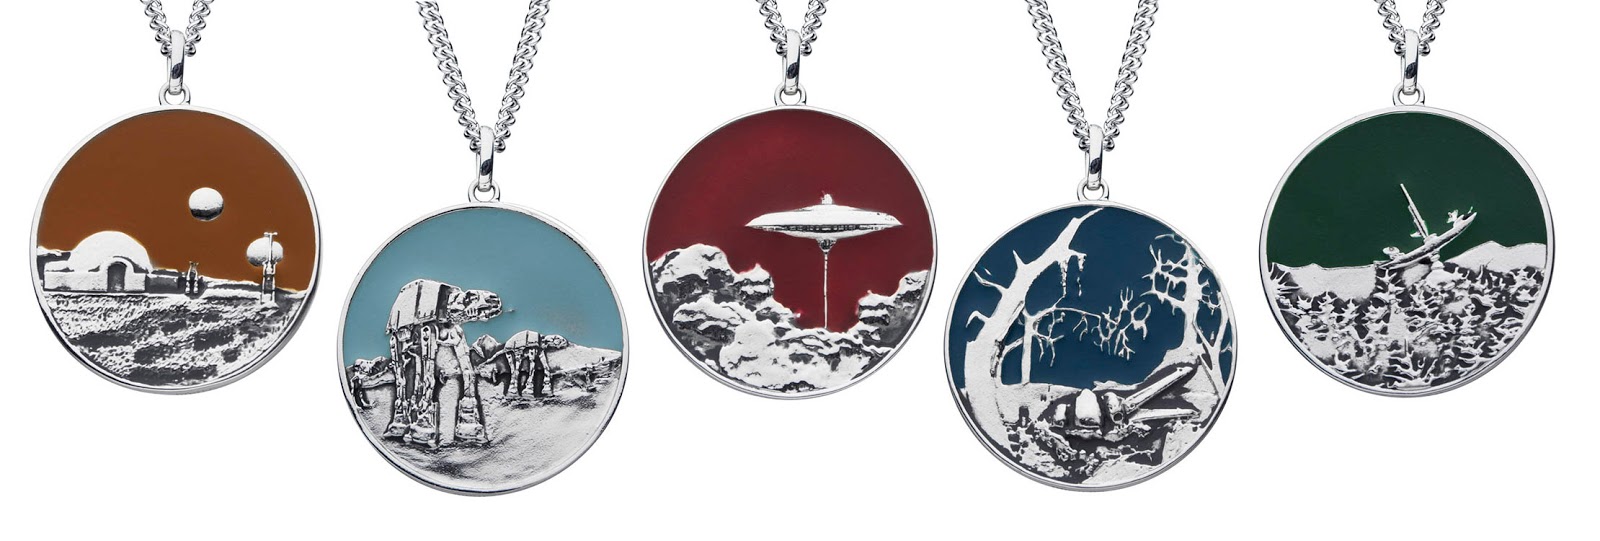 Planetary medallions from the new RockLove X Star Wars collection.